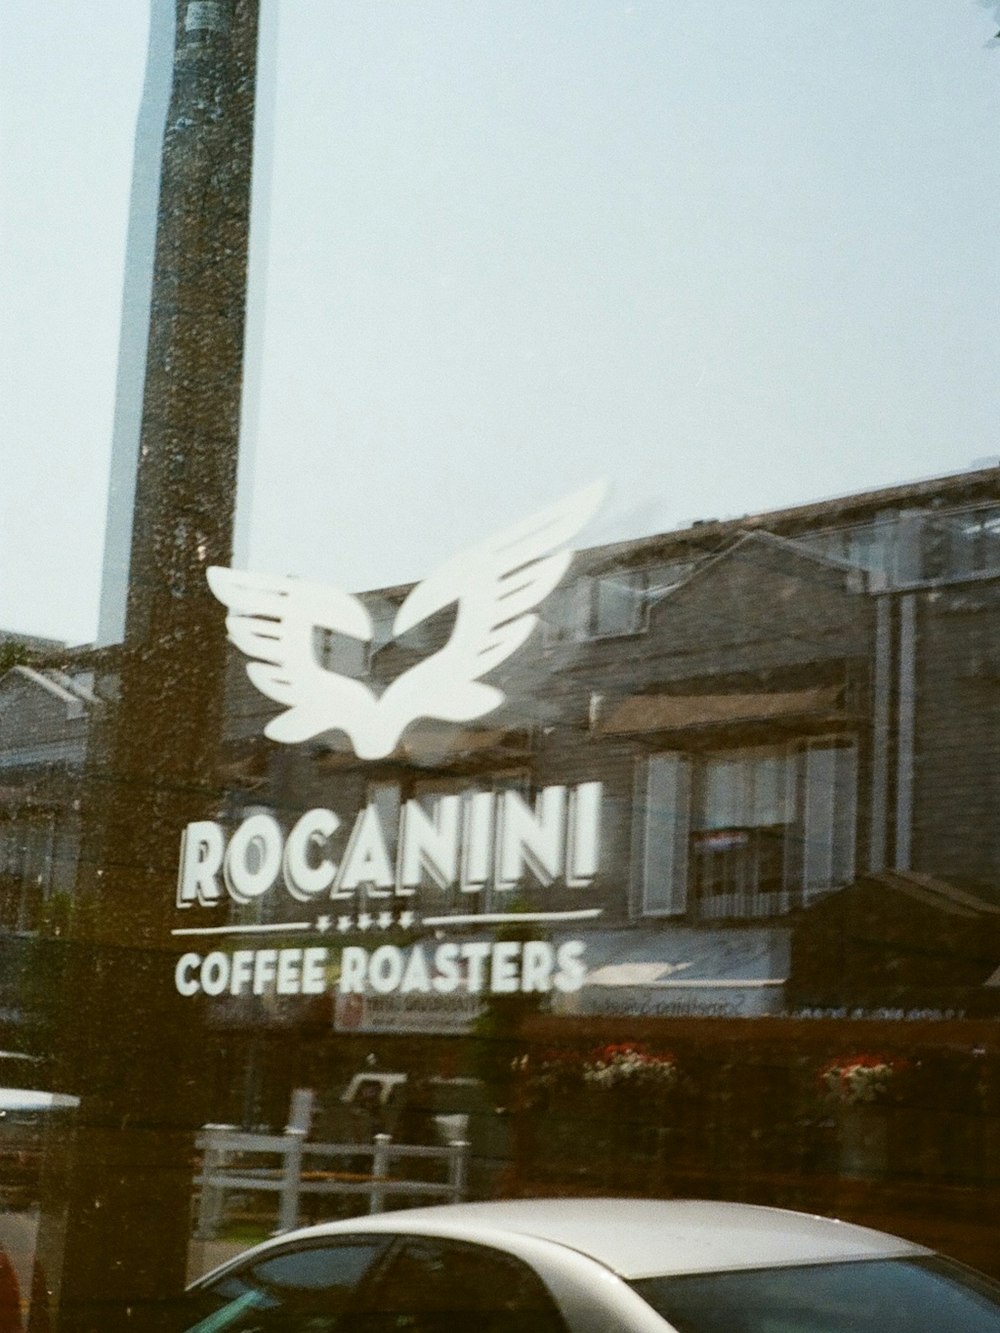 a building with a sign that says roganni coffee roasters